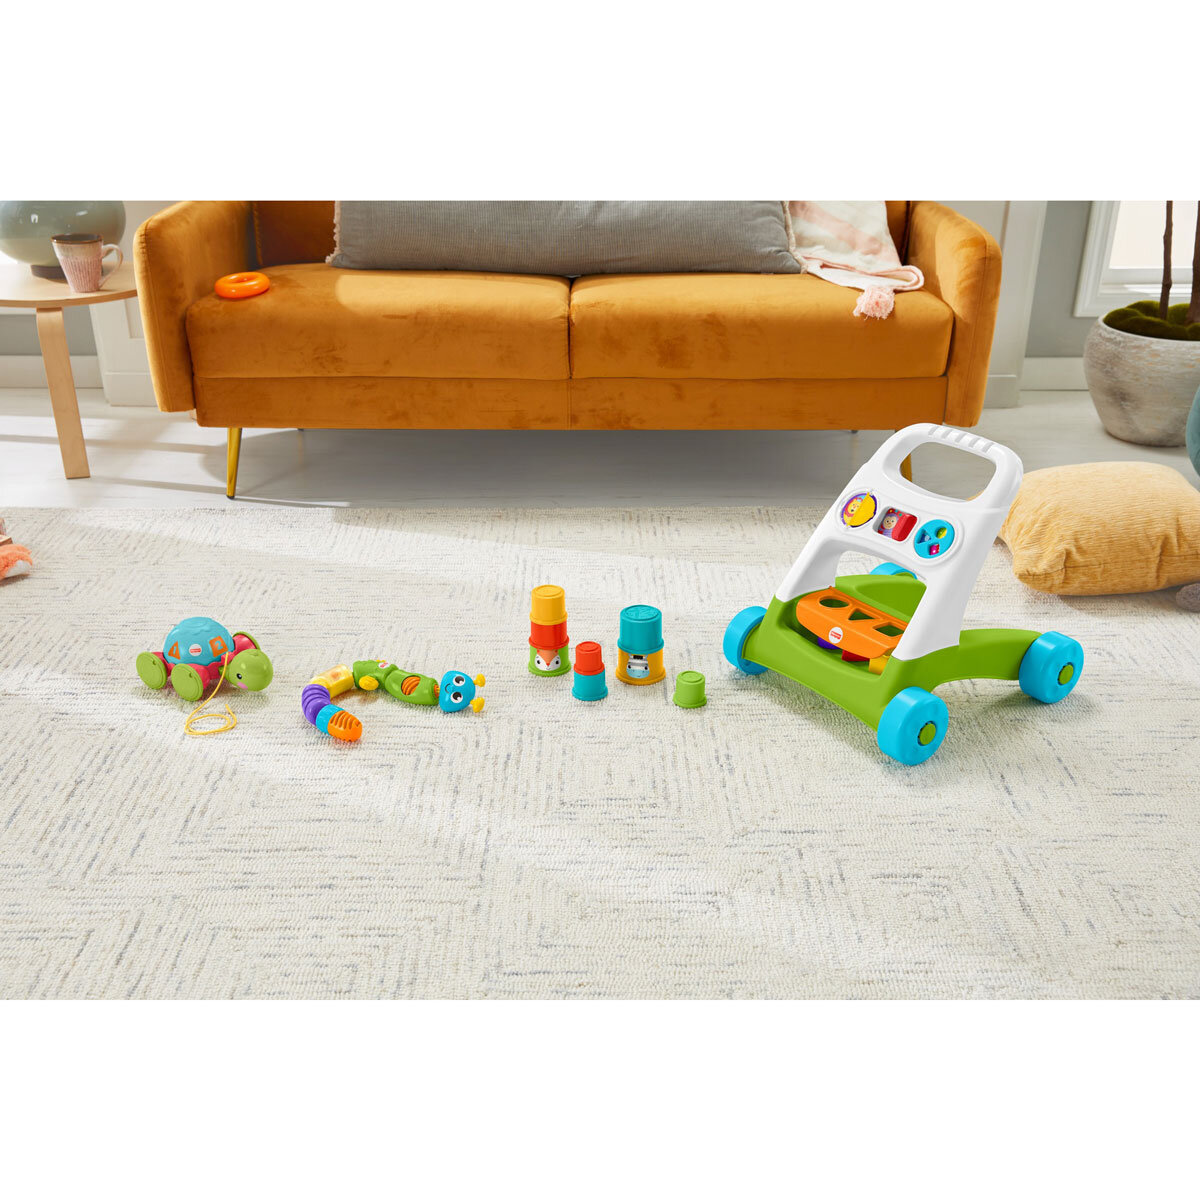 Buy Fisher Price Walk N Play Lifestyle Image at Costco.co.uk